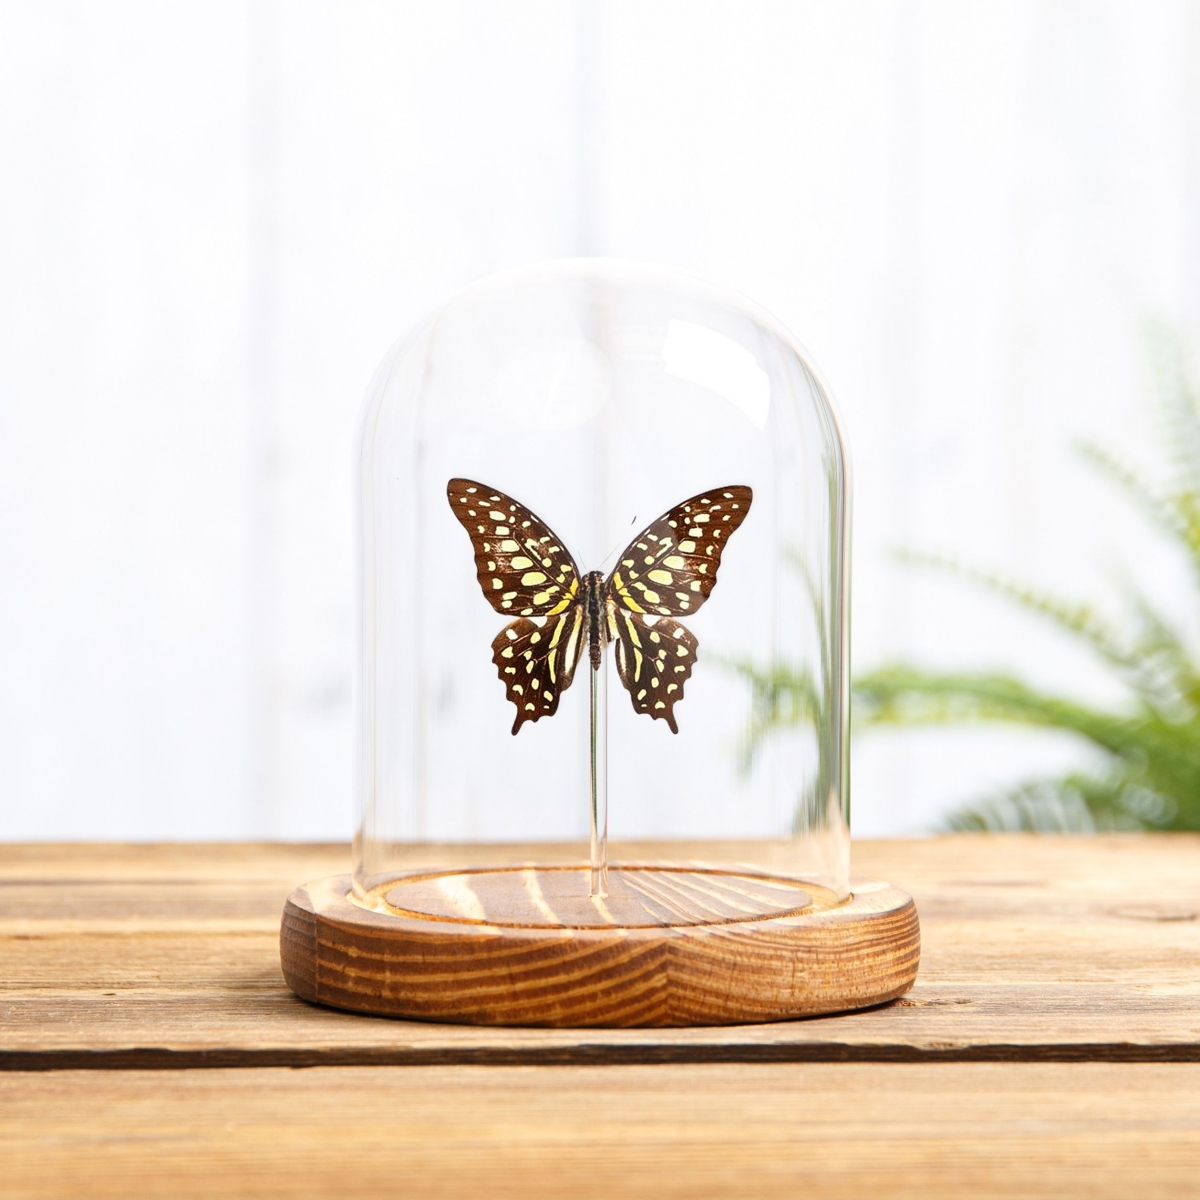 Tailed Jay Swallowtail in Glass Dome with Wooden Base (Graphium agamemnon)